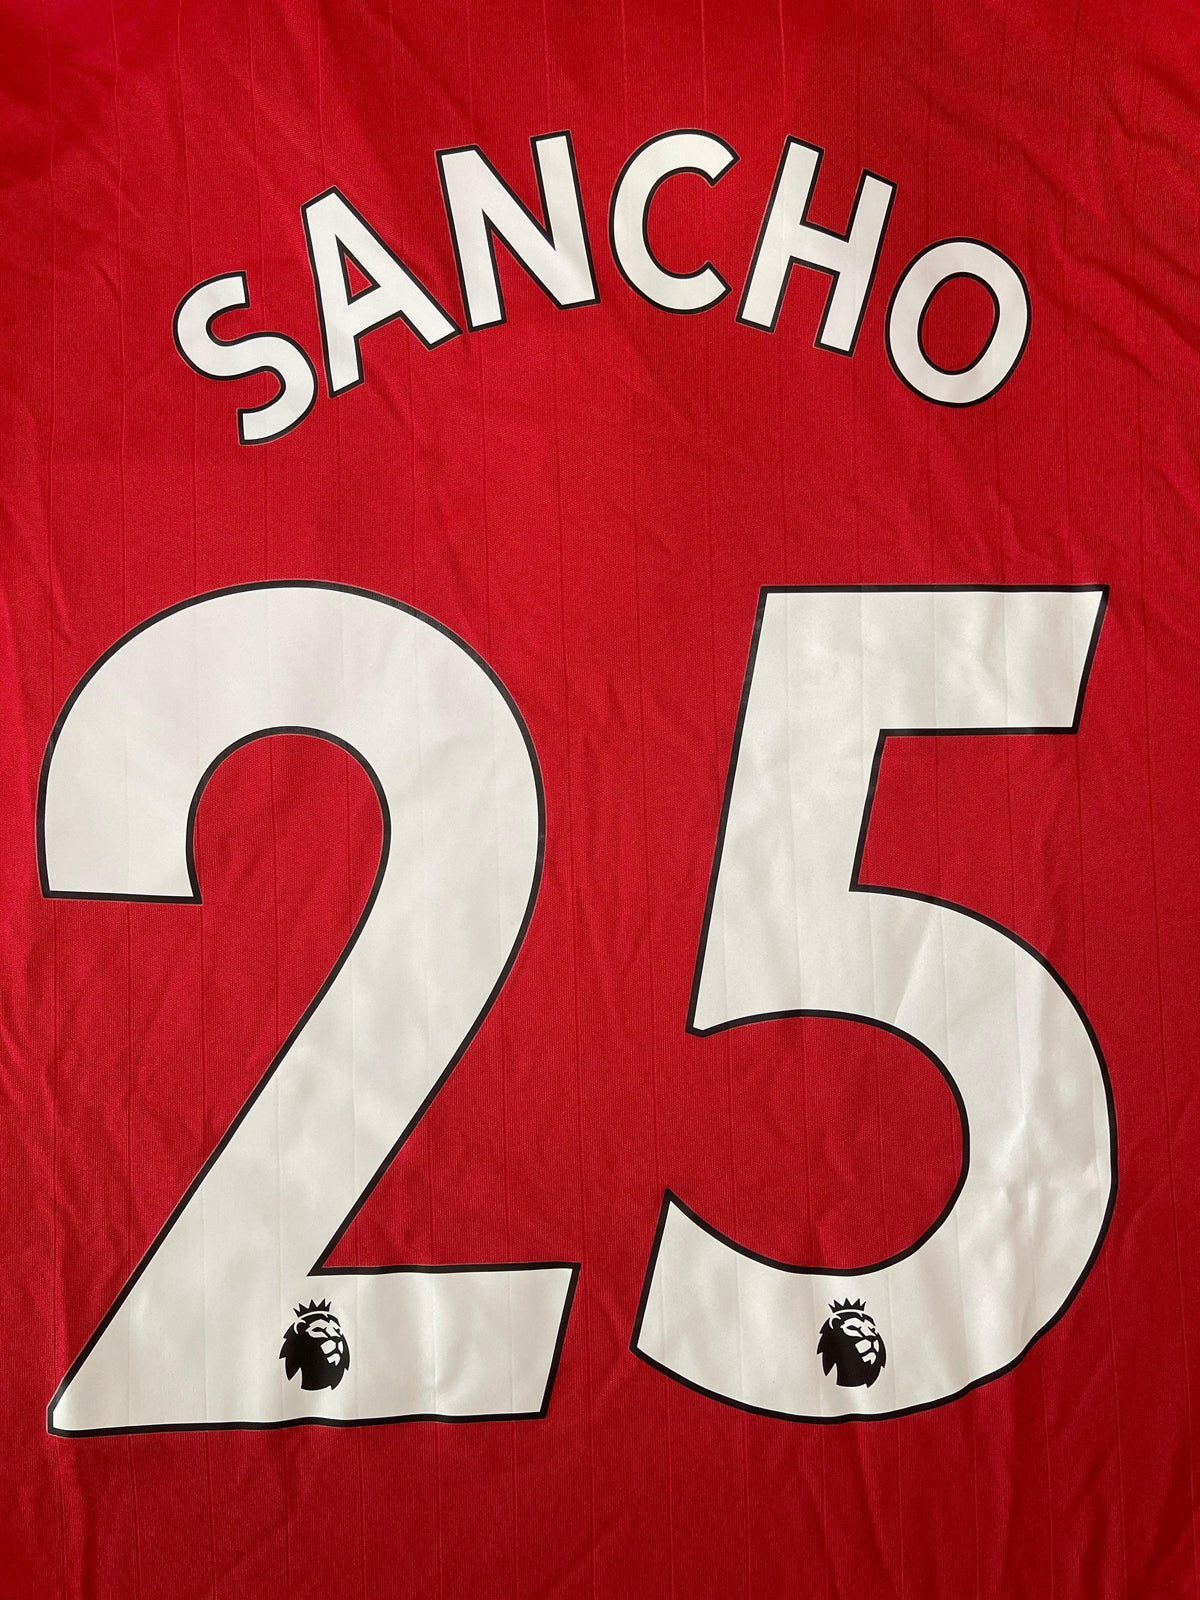 Manchester United Sancho #25 Adidas 22/23 Home Jersey Men's X-Large NWT